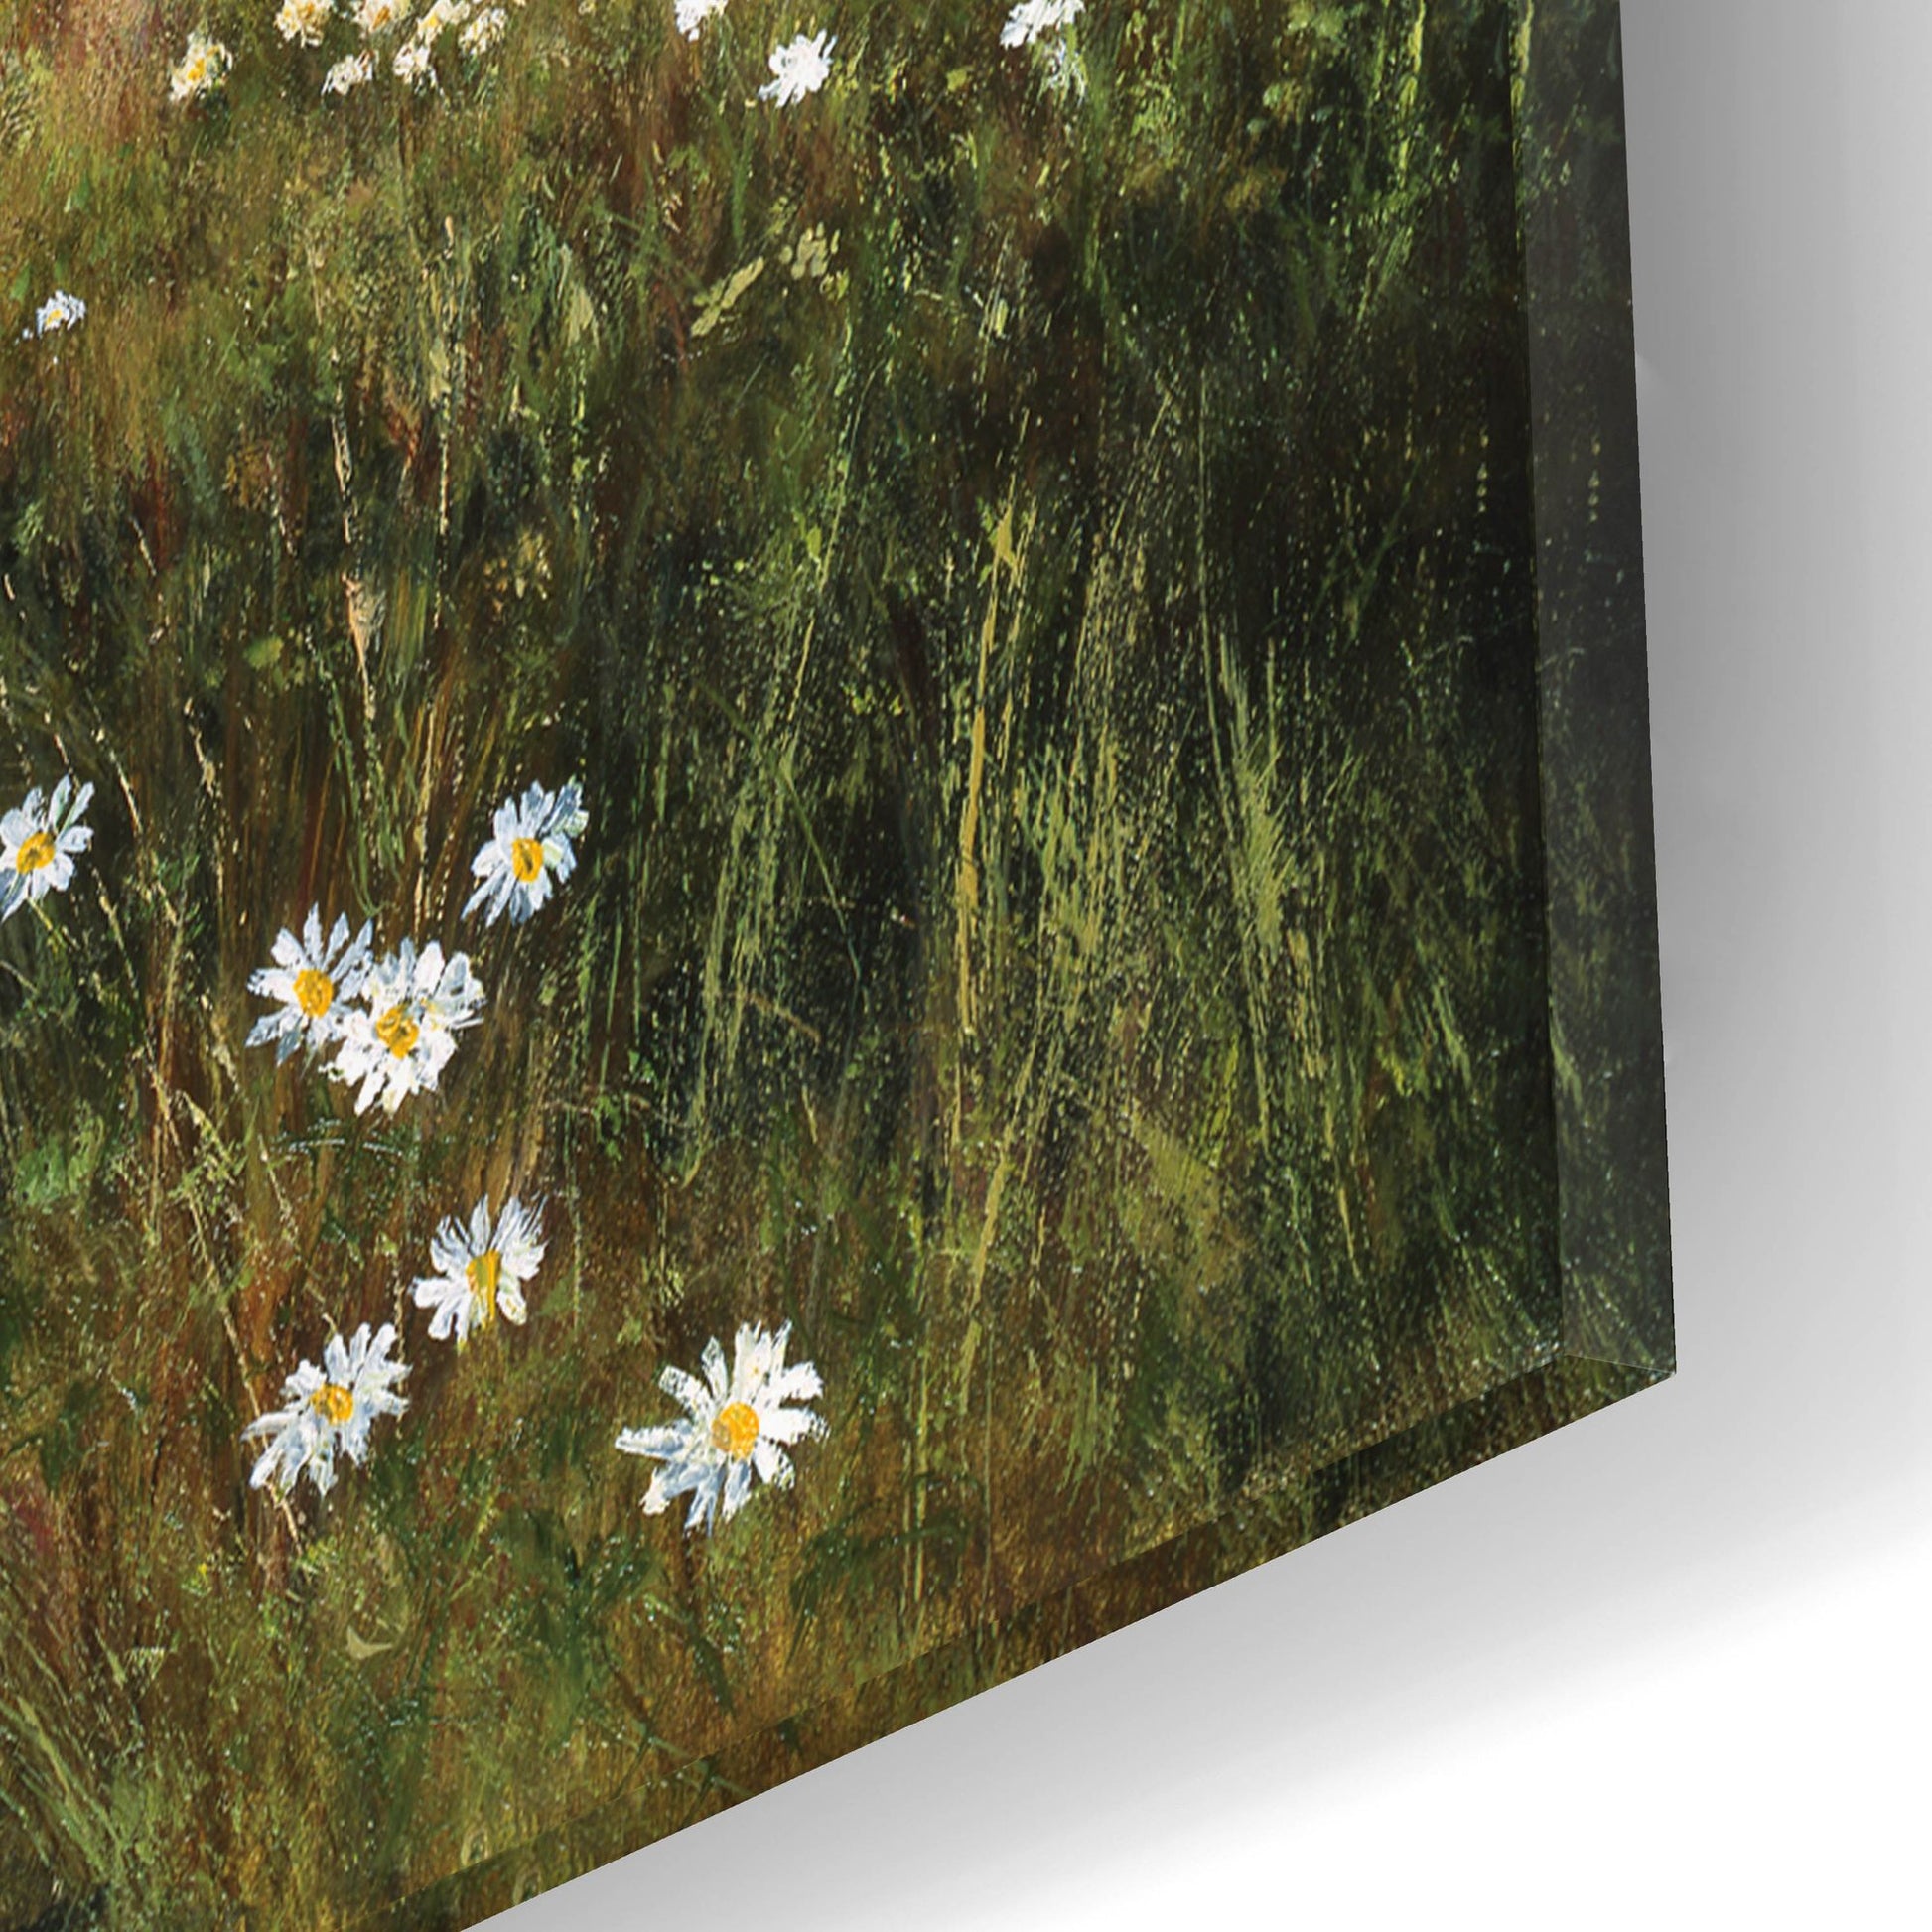 Epic Art 'Beeches And Daisies' by Bill Makinson, Acrylic Glass Wall Art,16x12